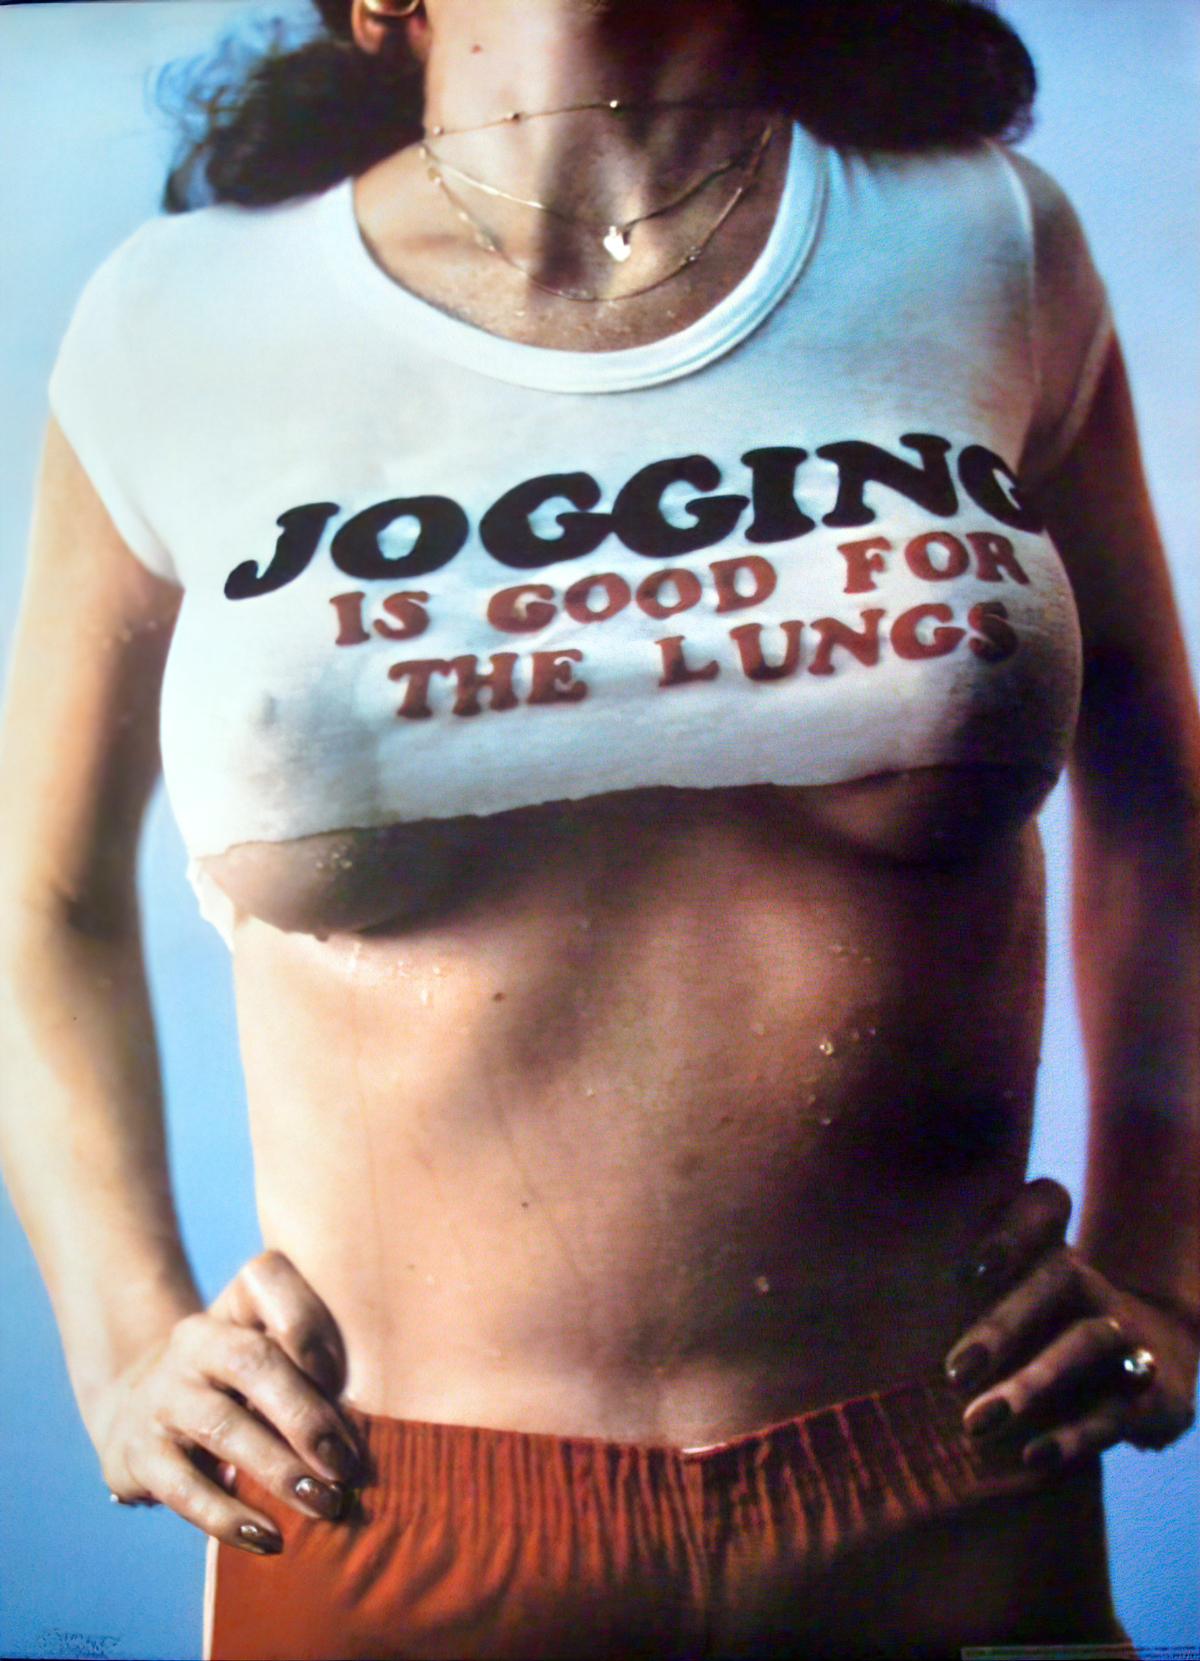 Jogging Is Good For The Lungs boobs shirt 1979 retro tee. PYGear.com